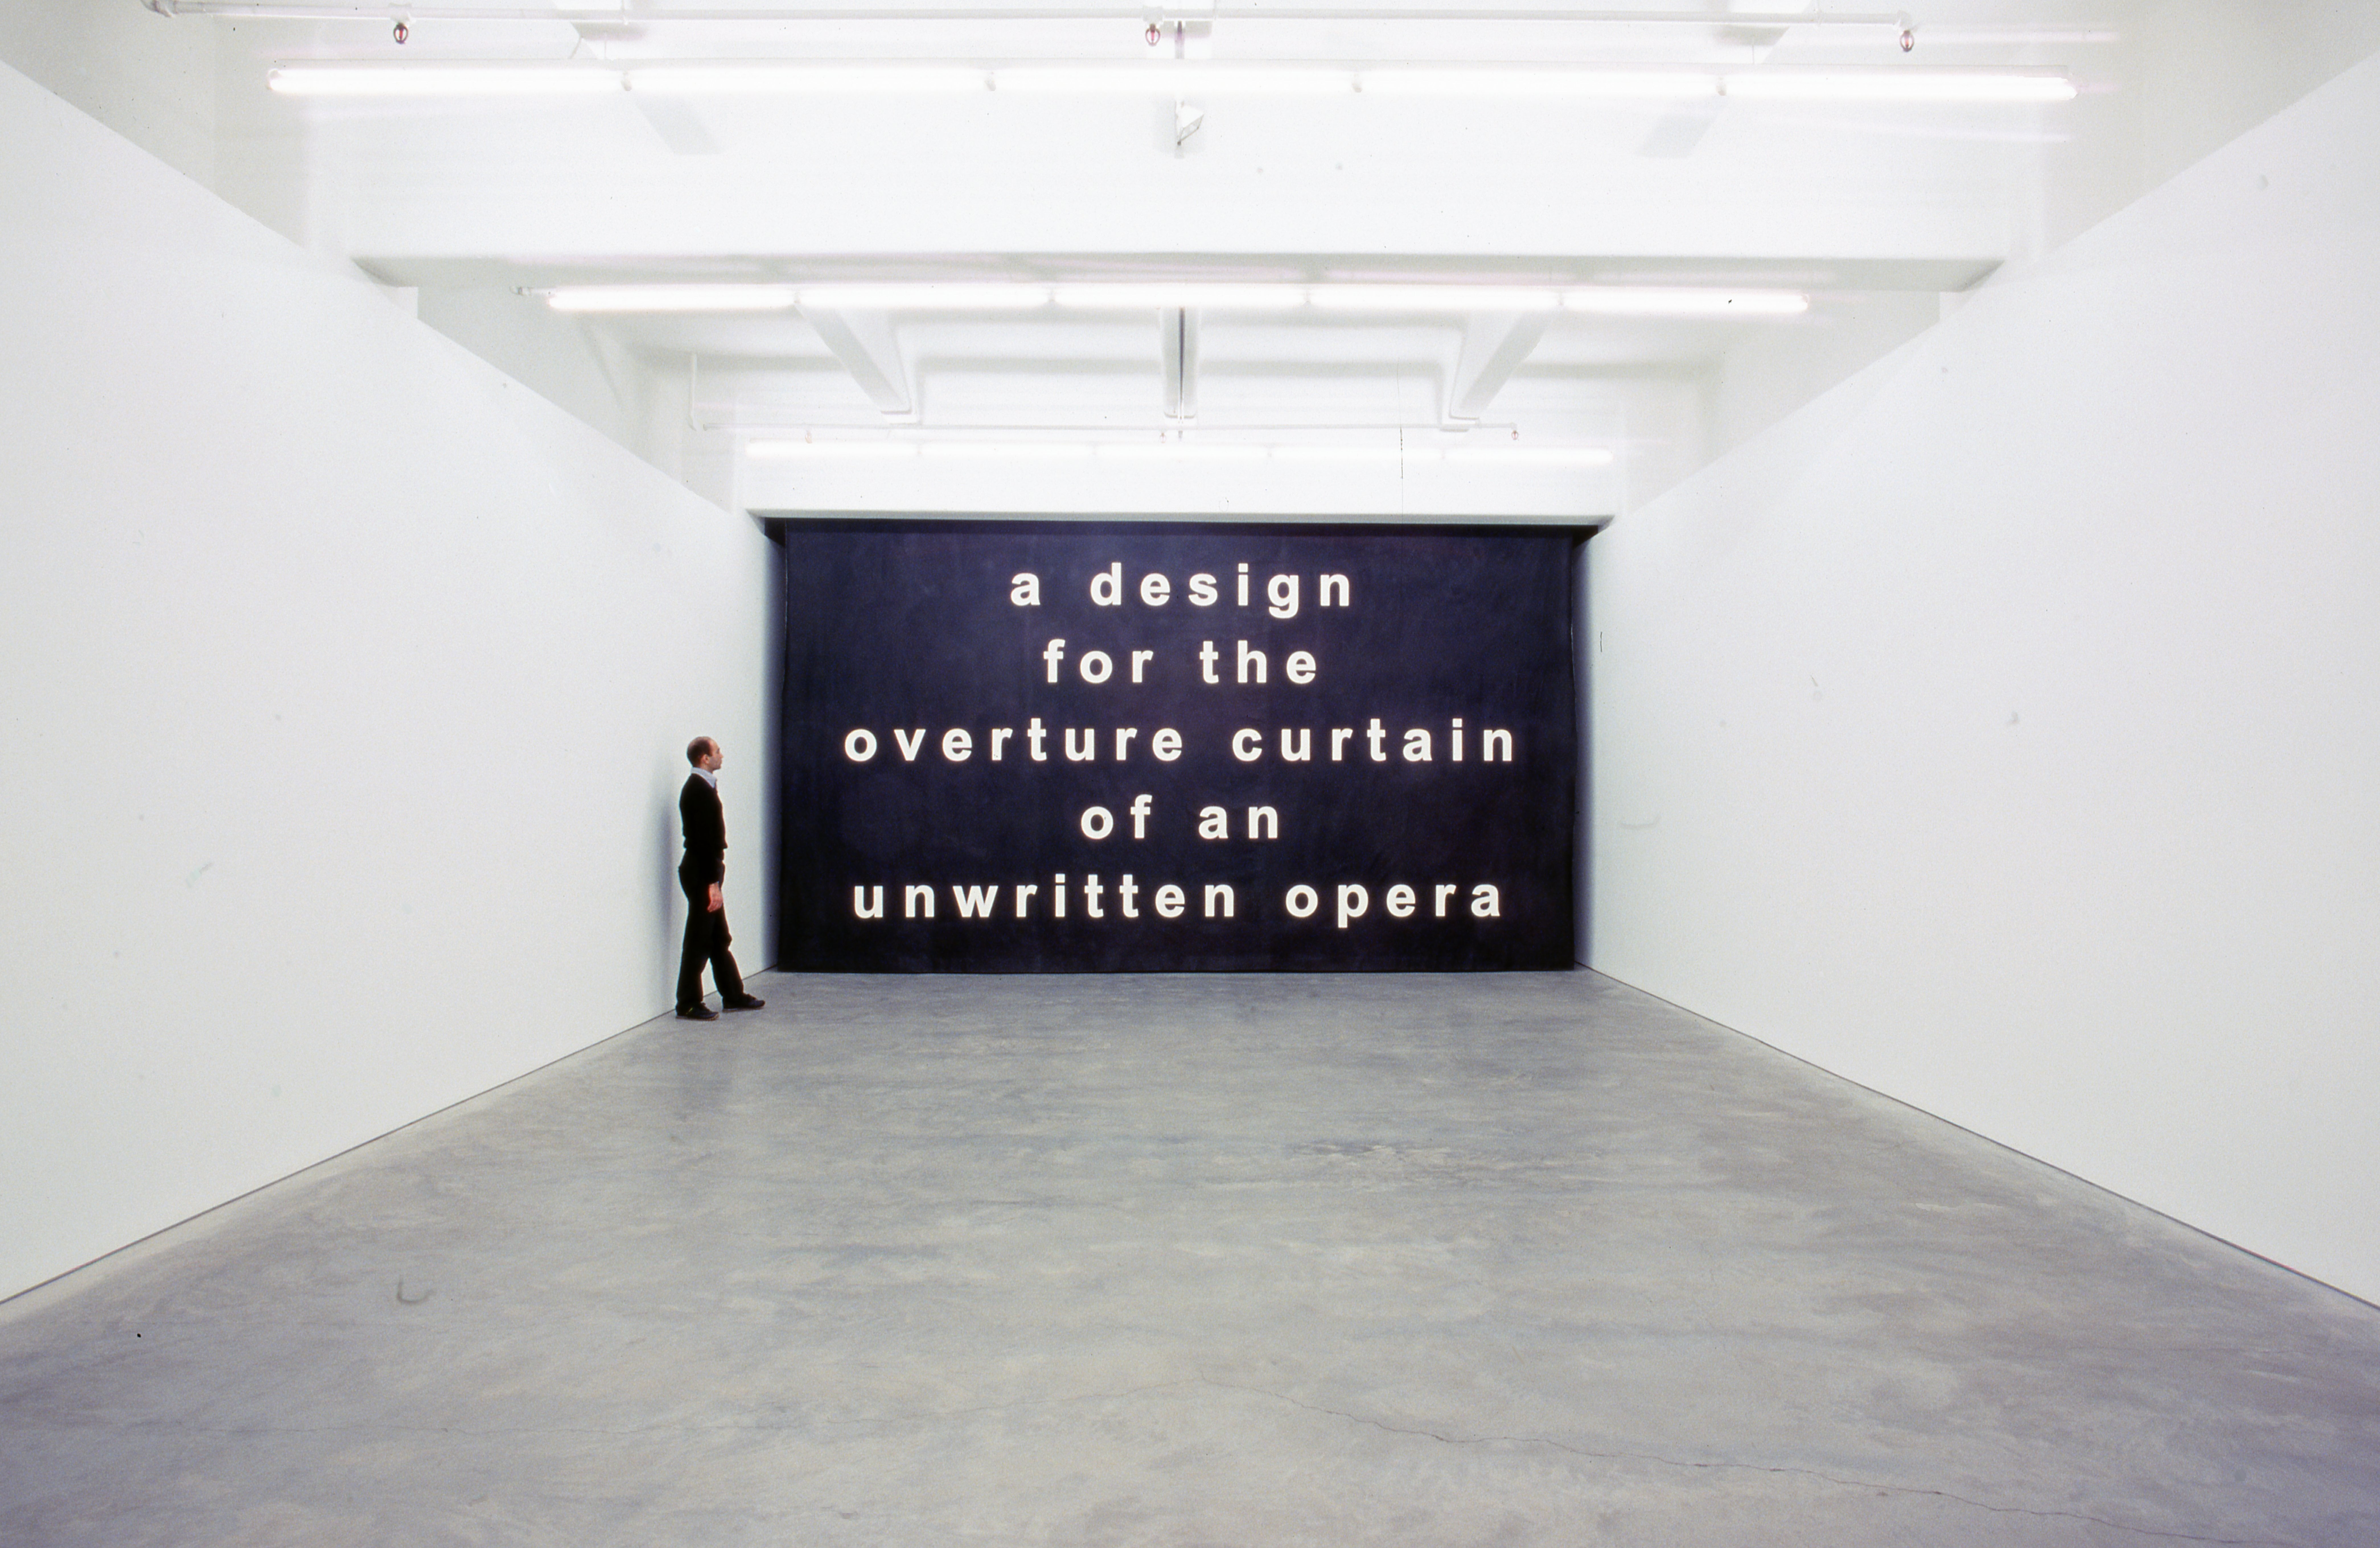 Image 02: Mutlu Çerkez with Untitled: 15 January 2028 from the series 'A design for the overture curtain of an unwritten opera 1999', synthetic polymer paint on canvas, 352x632cm, installation view, Anna Schwartz Gallery, Melbourne, 1999.